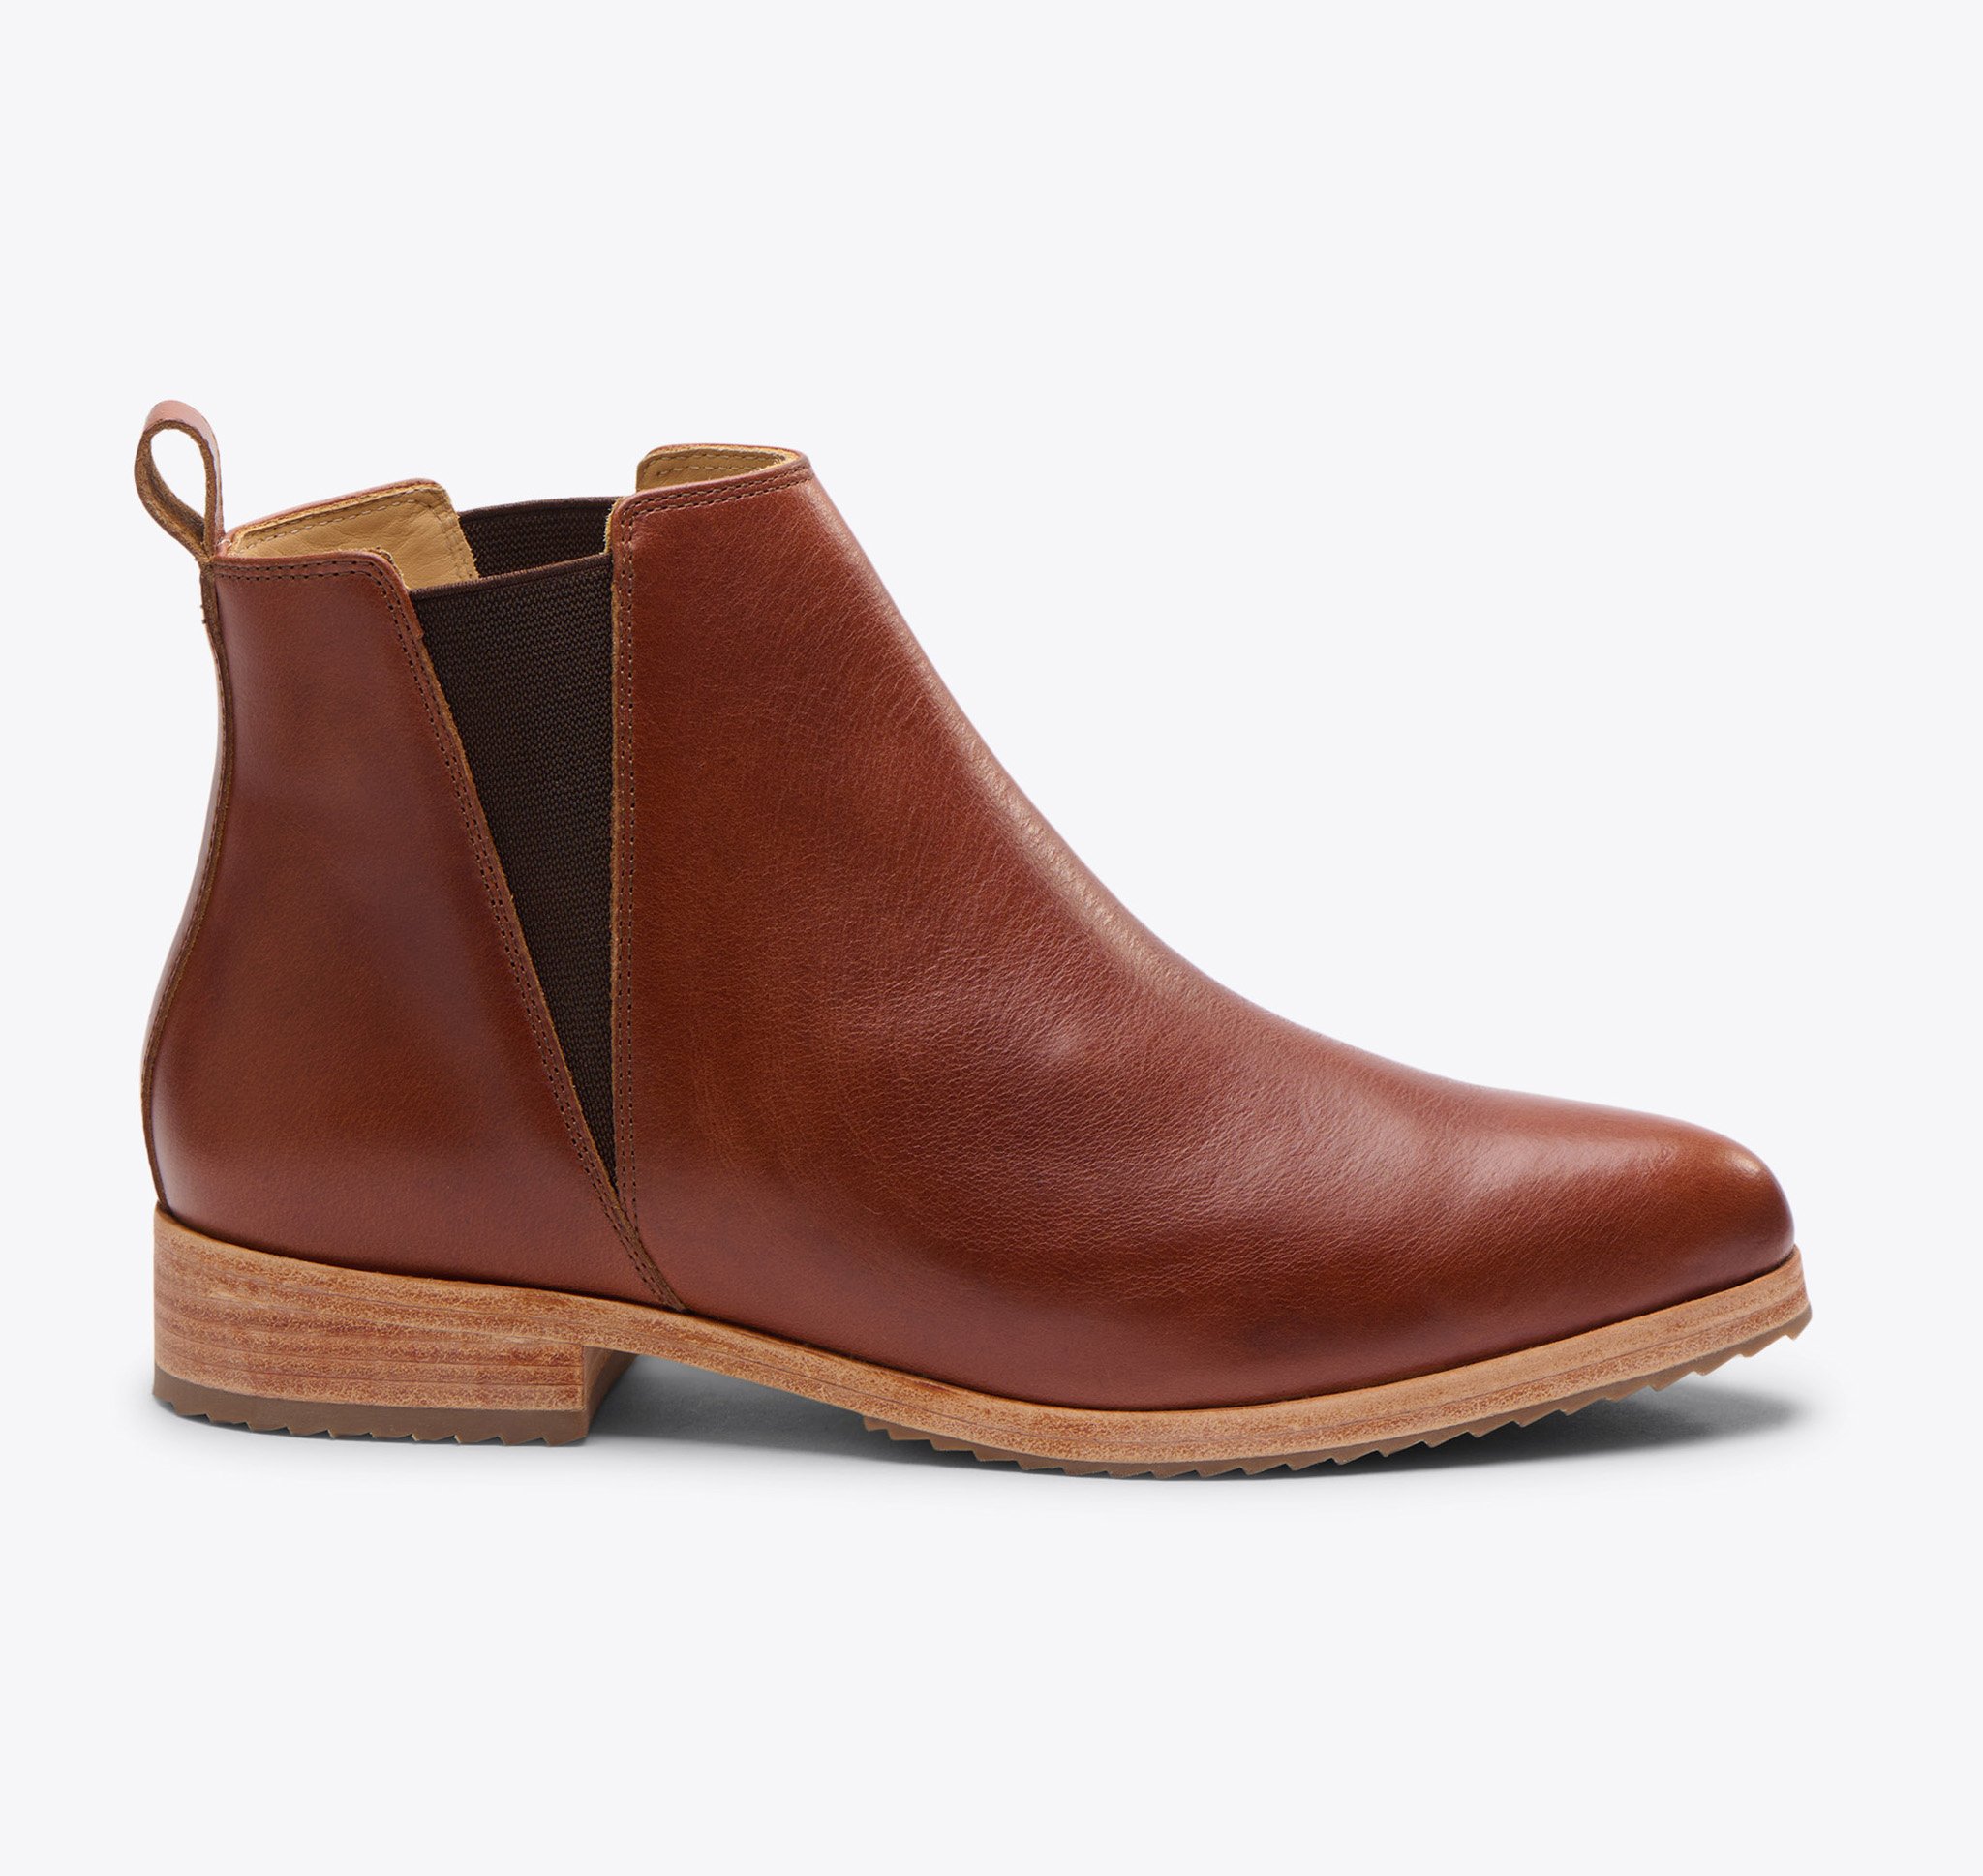 Nisolo Classic Chelsea Boot Brandy - Every Nisolo product is built on the foundation of comfort, function, and design. 